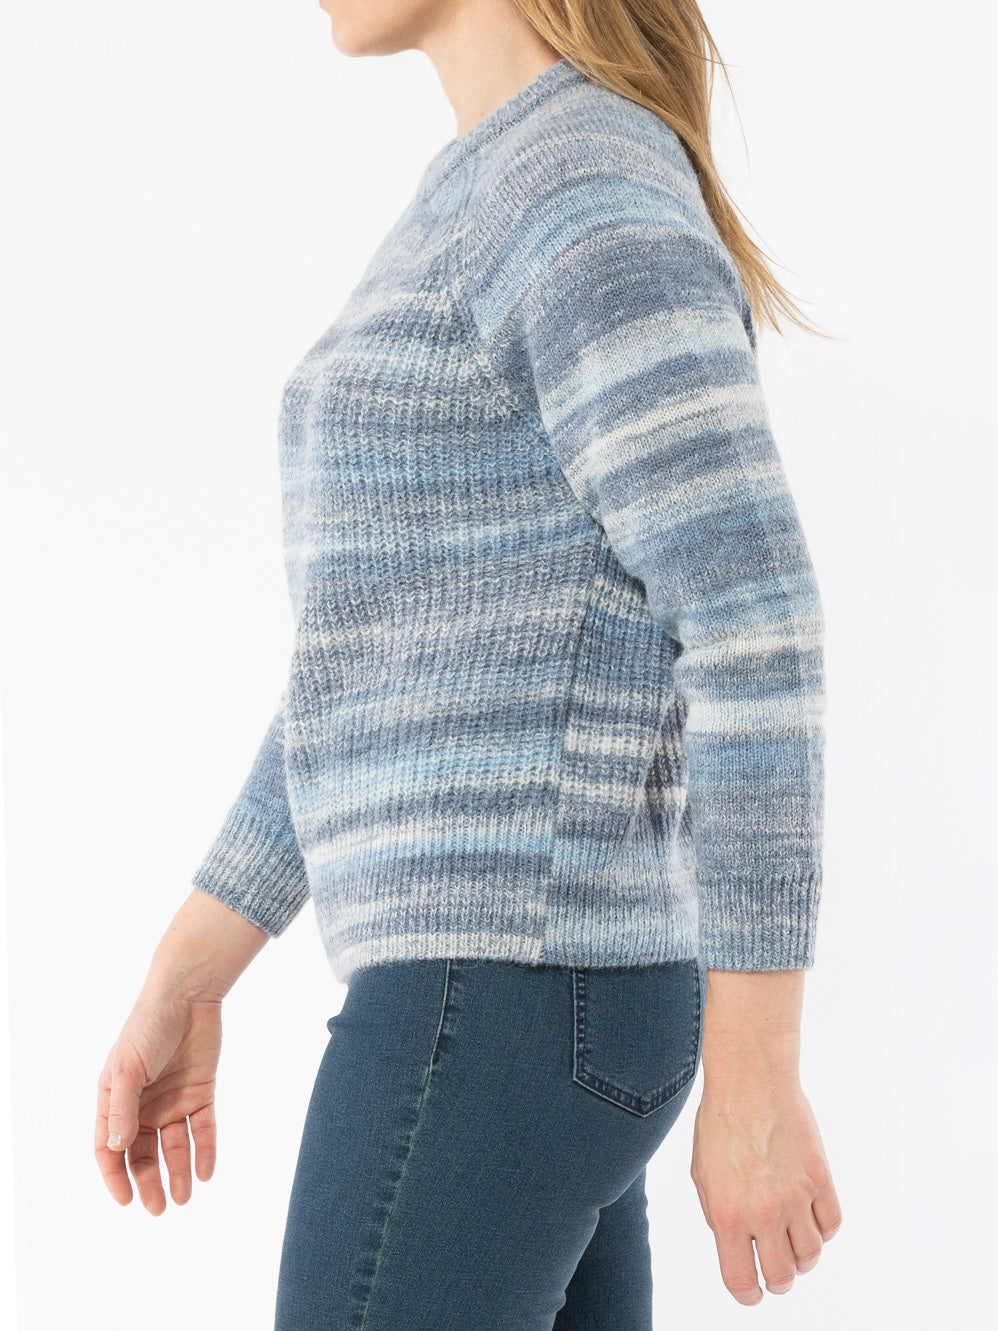 JUMP SPACE DYE PULLOVER